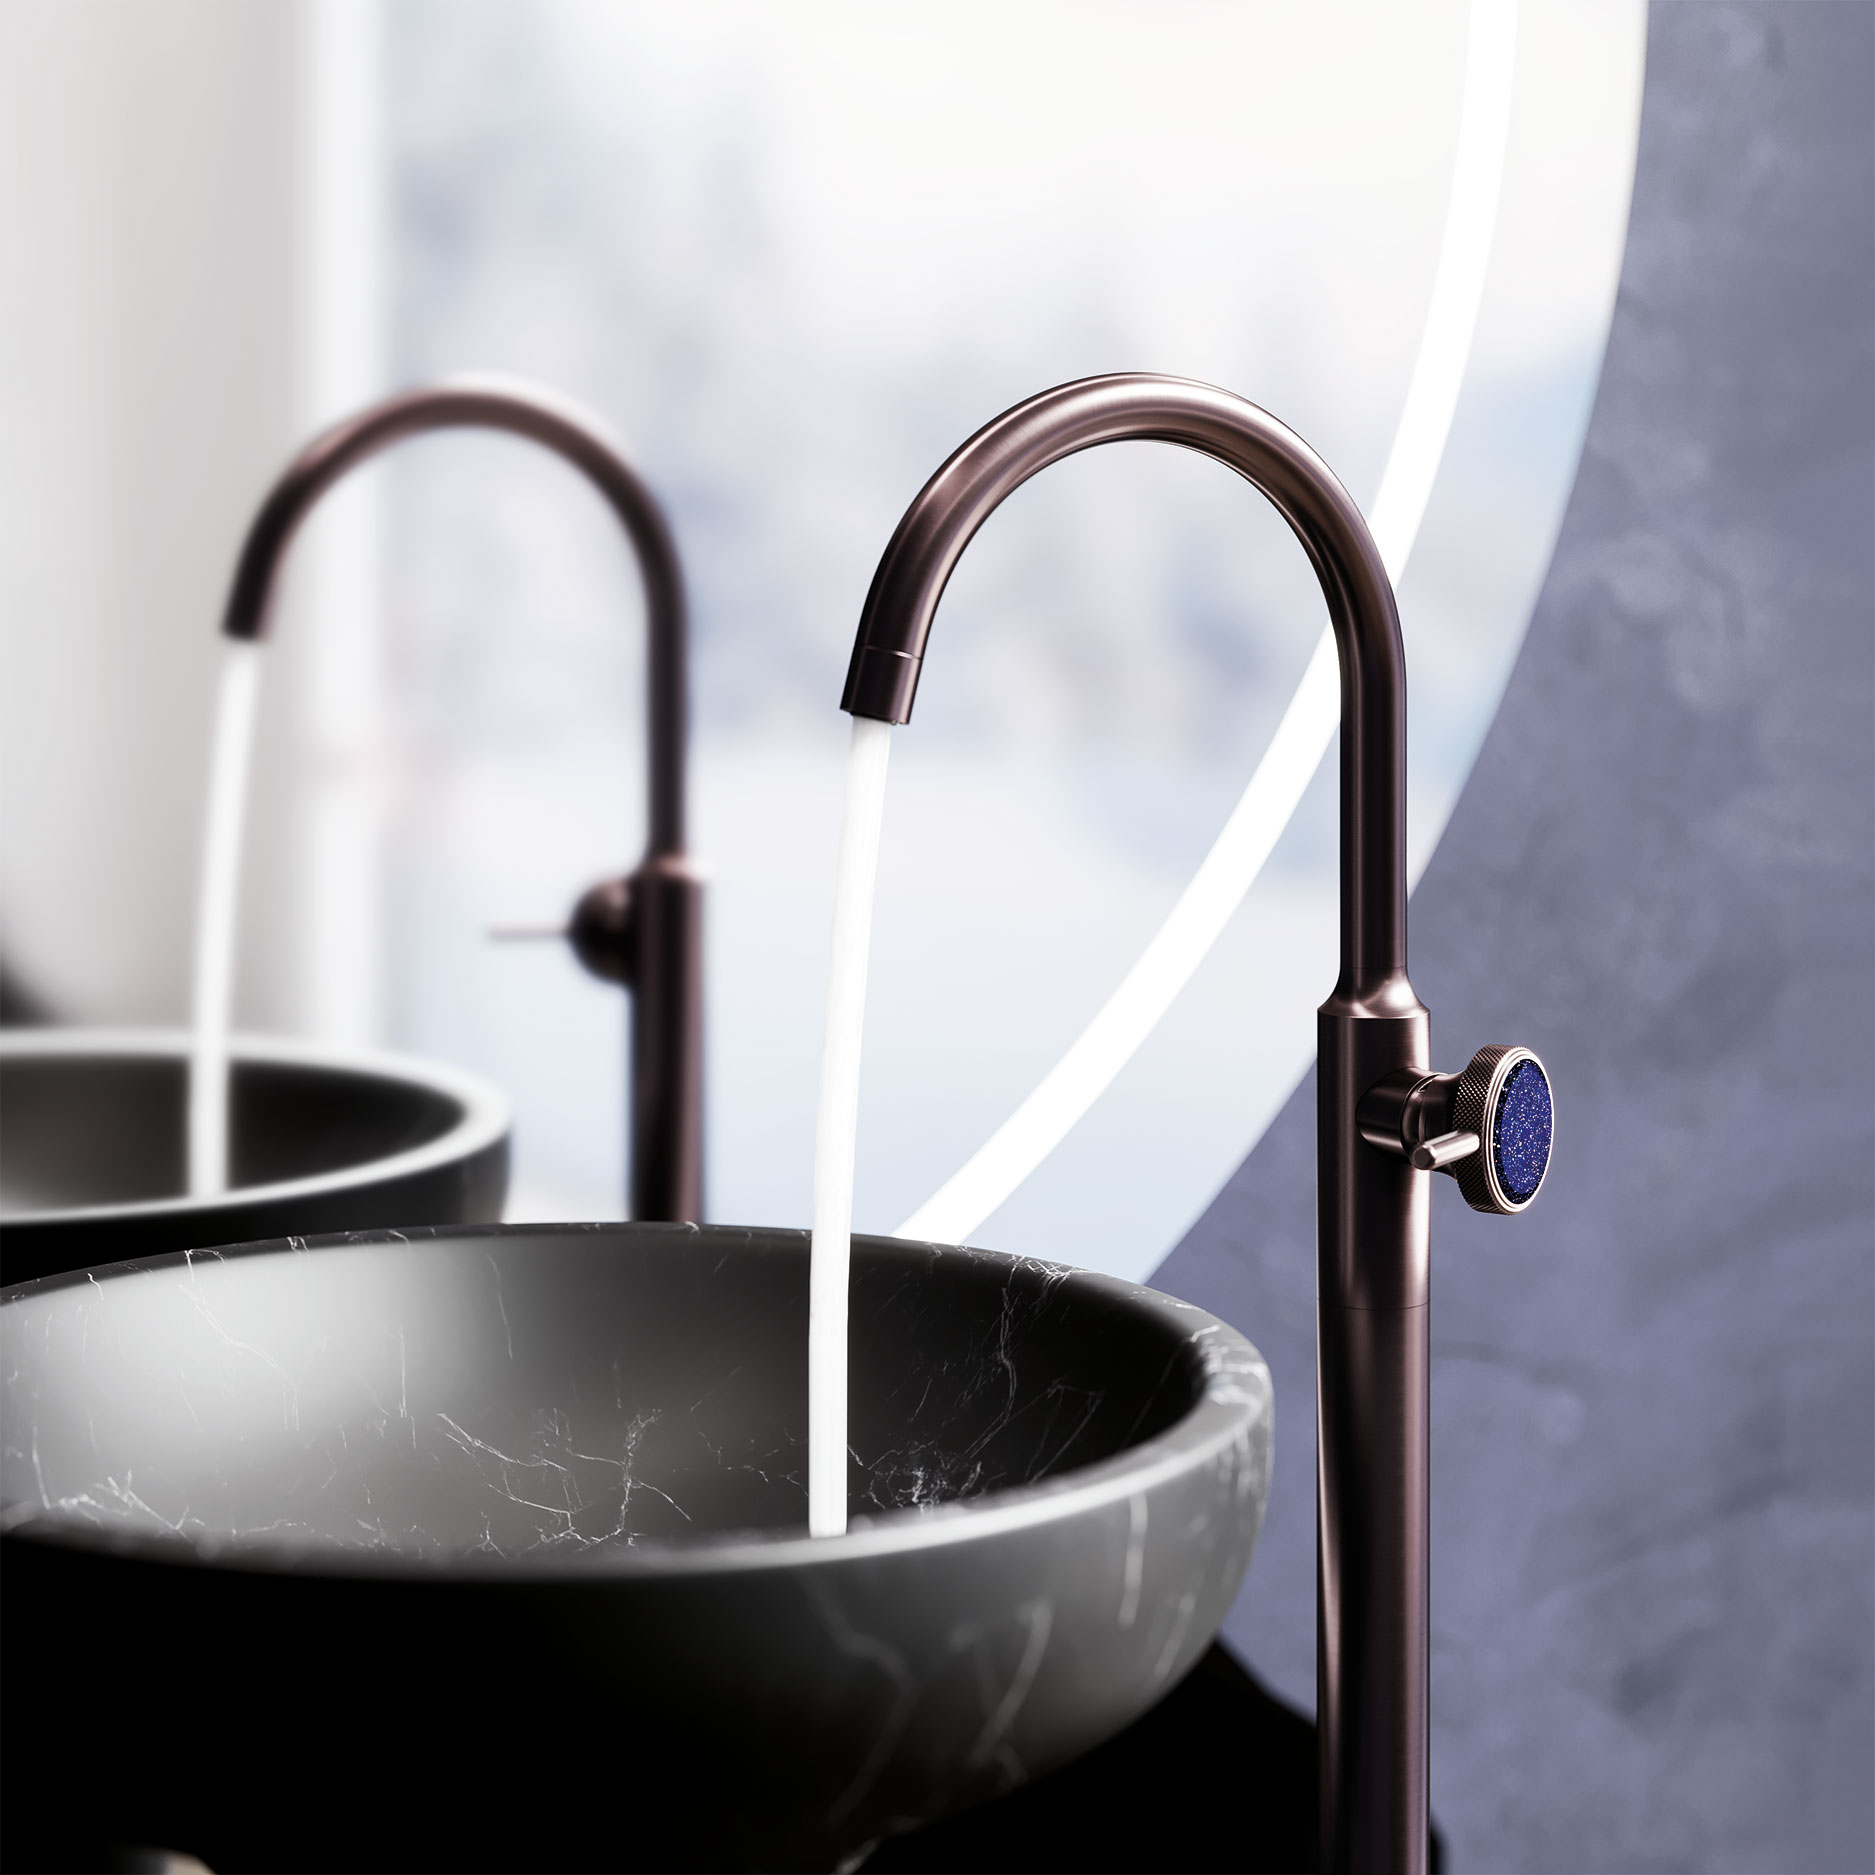 Luxury & Avant-garde – Exquisite shine with glamorous moments - Jörger  Bathroom Fittings and Accessories